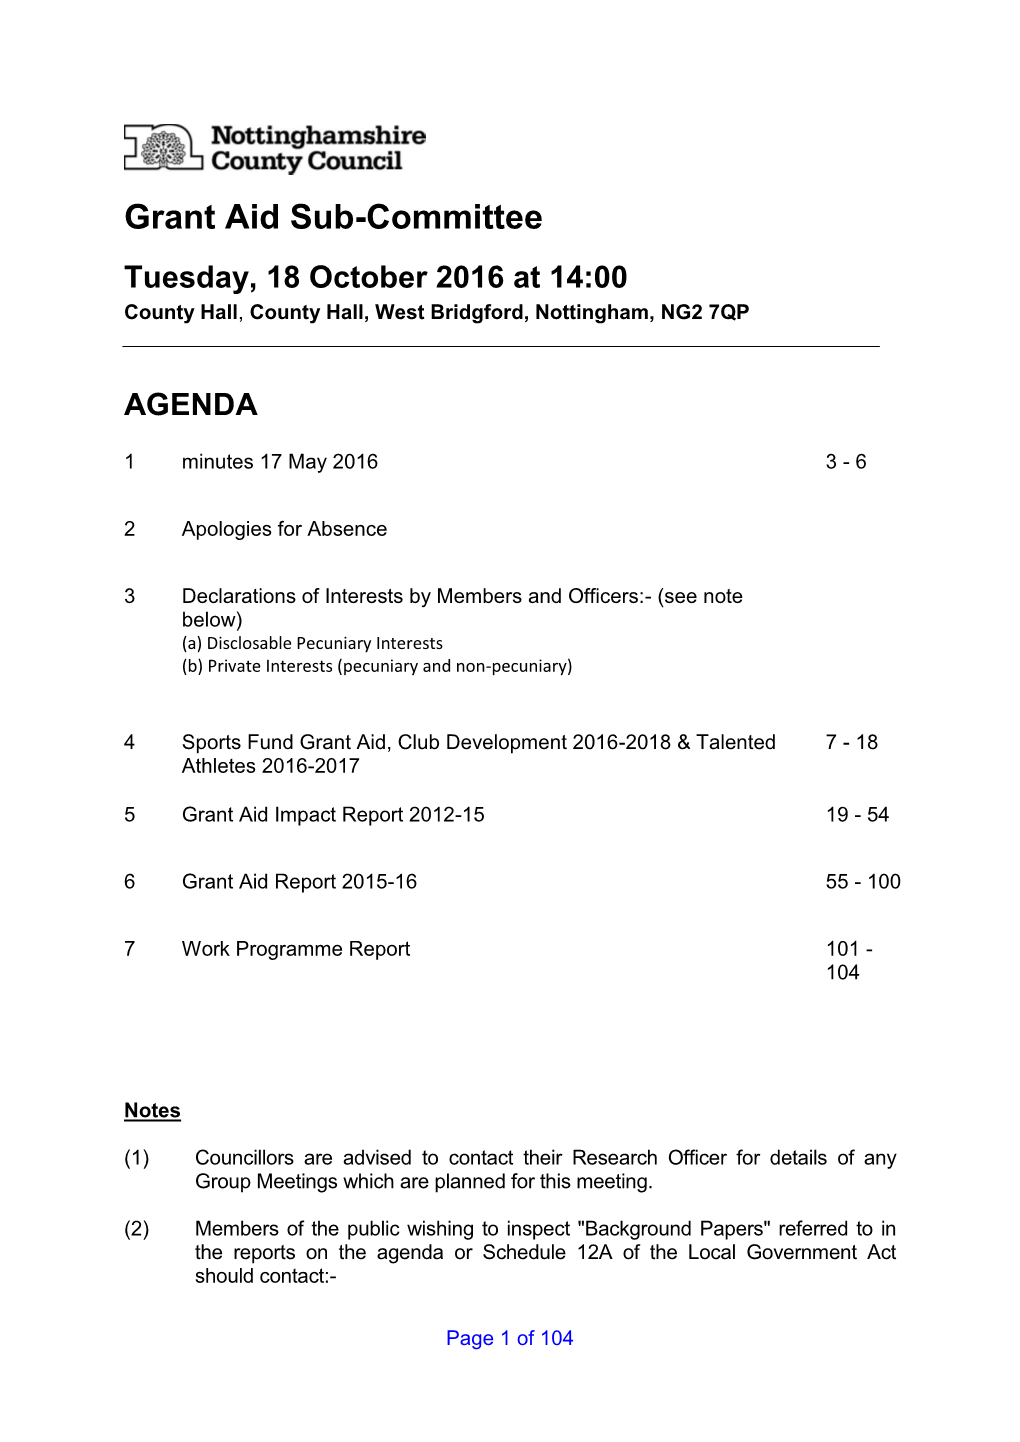 Grant Aid Sub-Committee Tuesday, 18 October 2016 at 14:00 County Hall, County Hall, West Bridgford, Nottingham, NG2 7QP